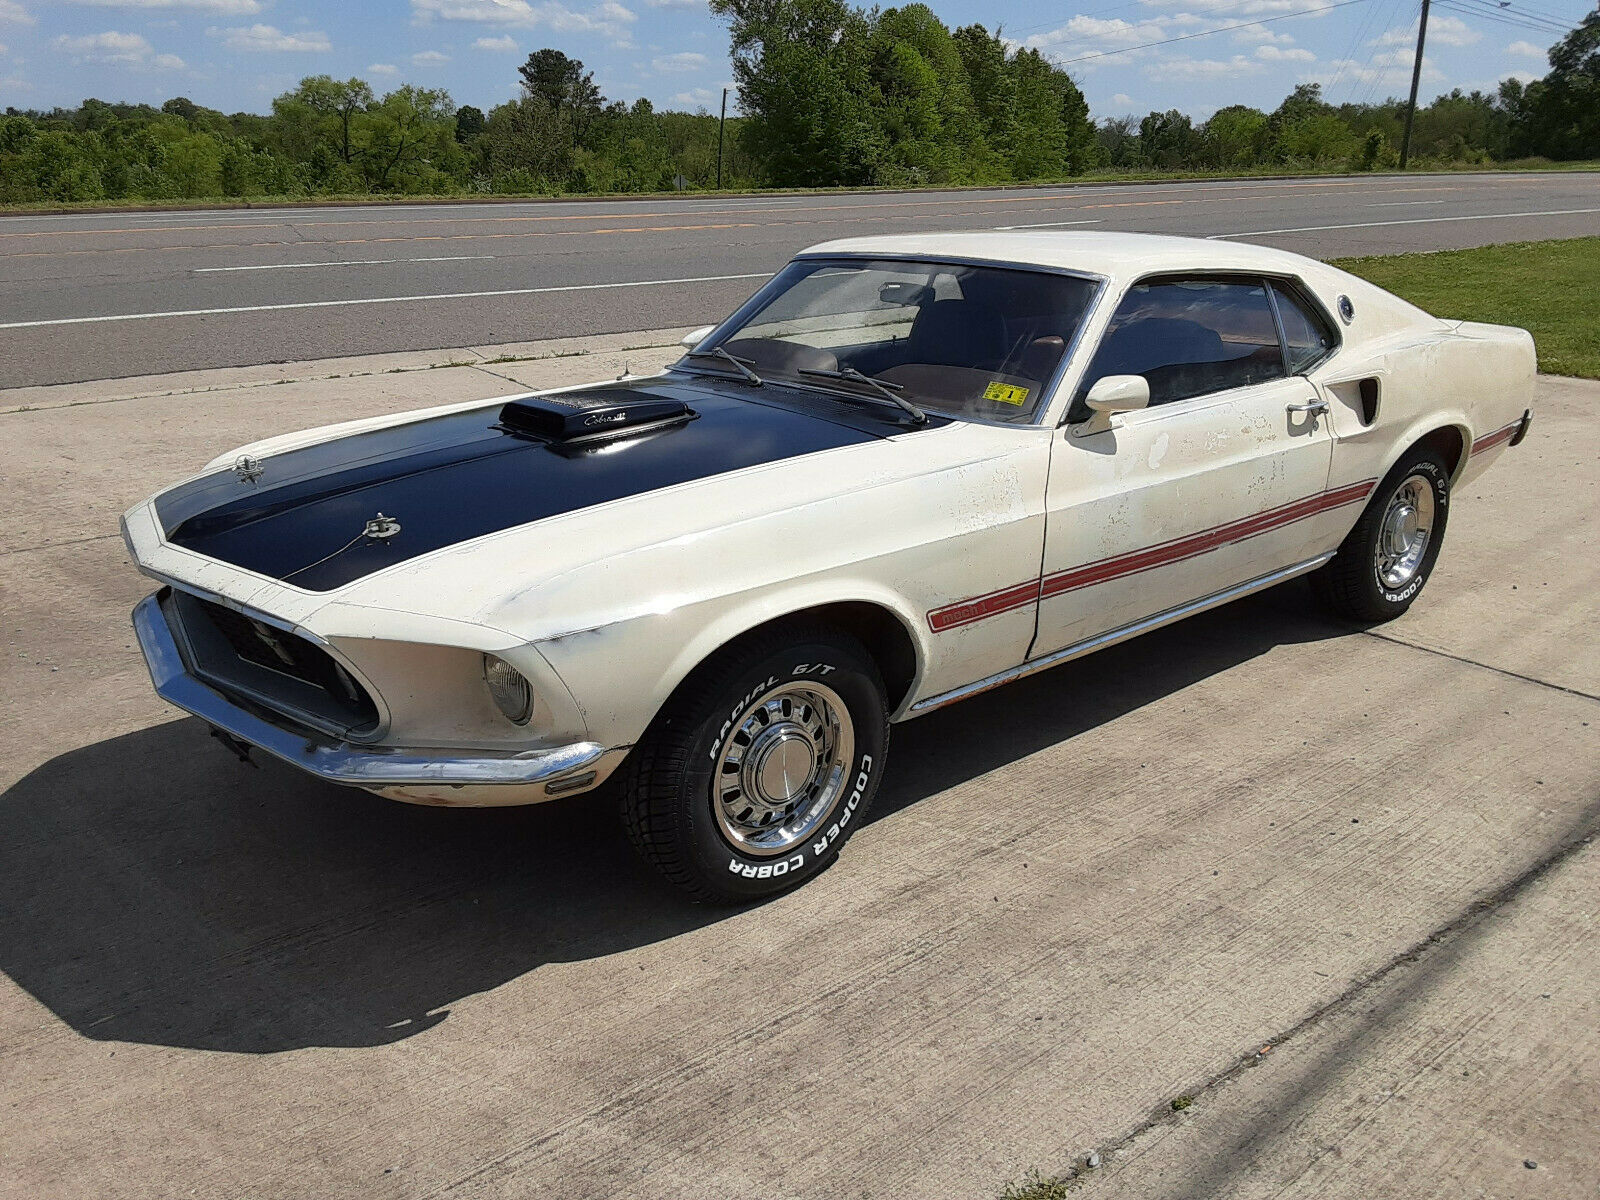 1969 Ford Mustang Mach 1 Saved After Being Stored Since 1979, Is an ...